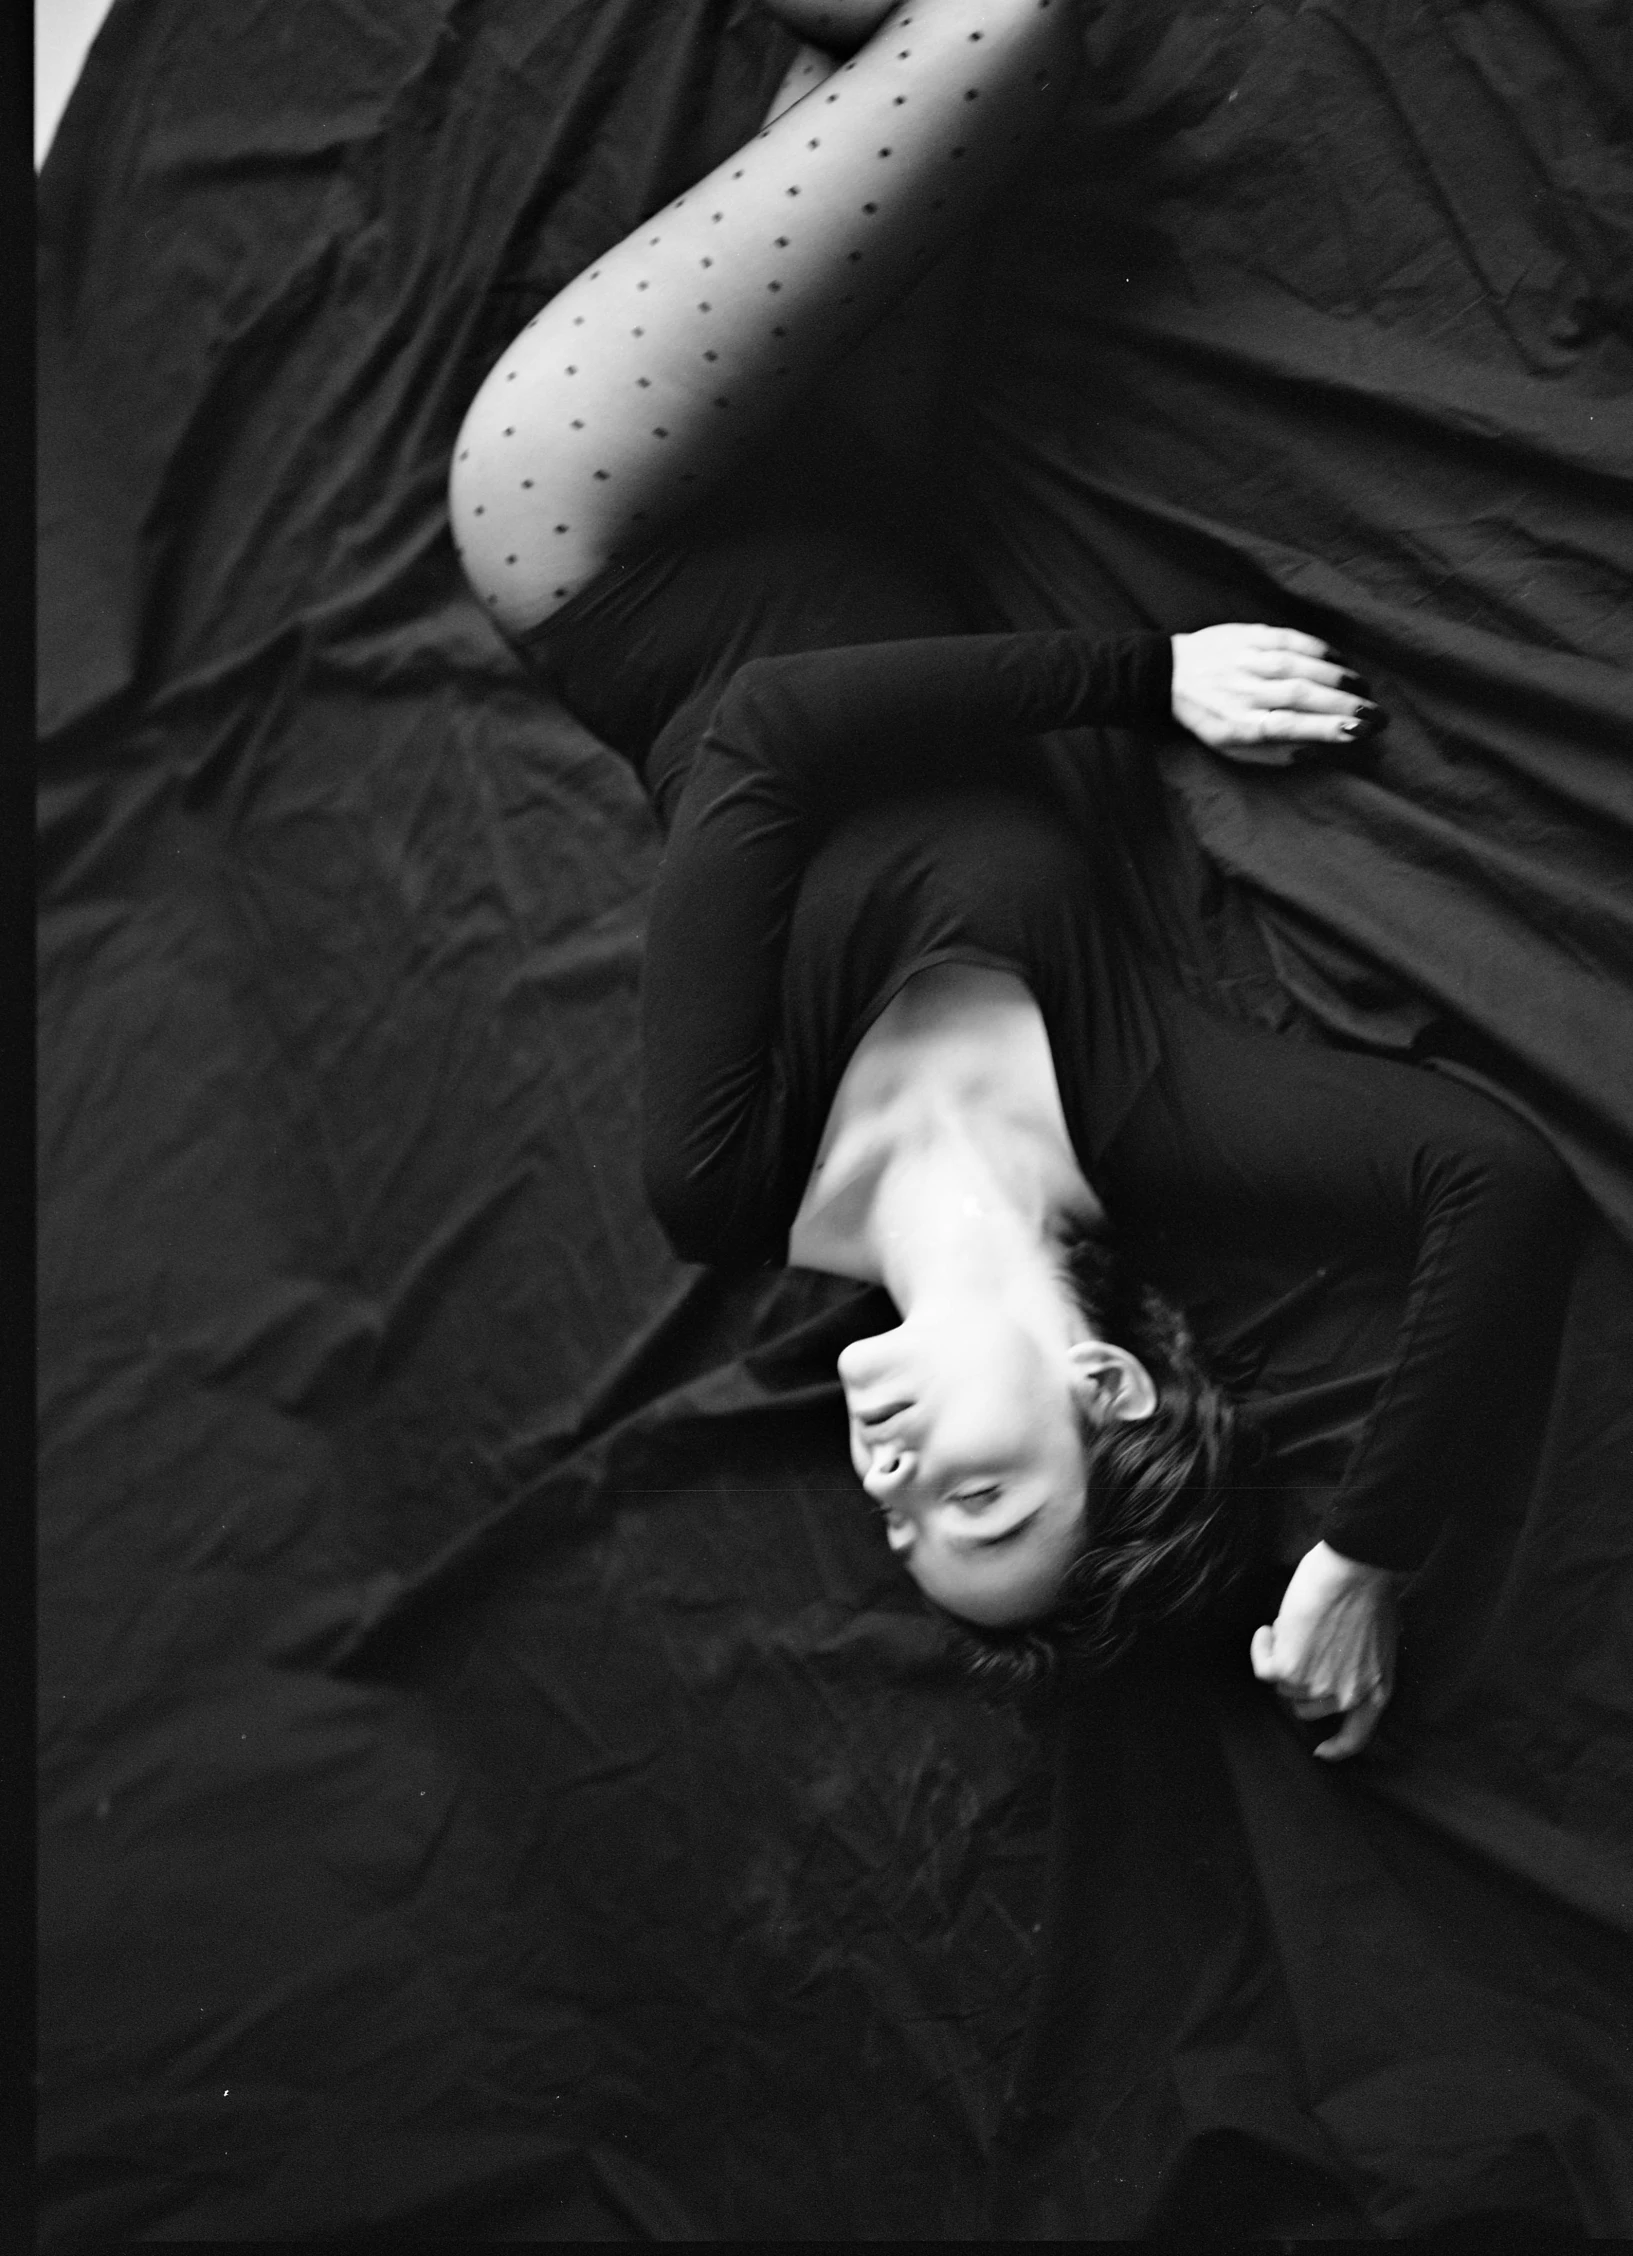 a black and white photo of a woman laying on a bed, a black and white photo, unsplash, conceptual art, studio medium format photograph, black cloth, 15081959 21121991 01012000 4k, medium format